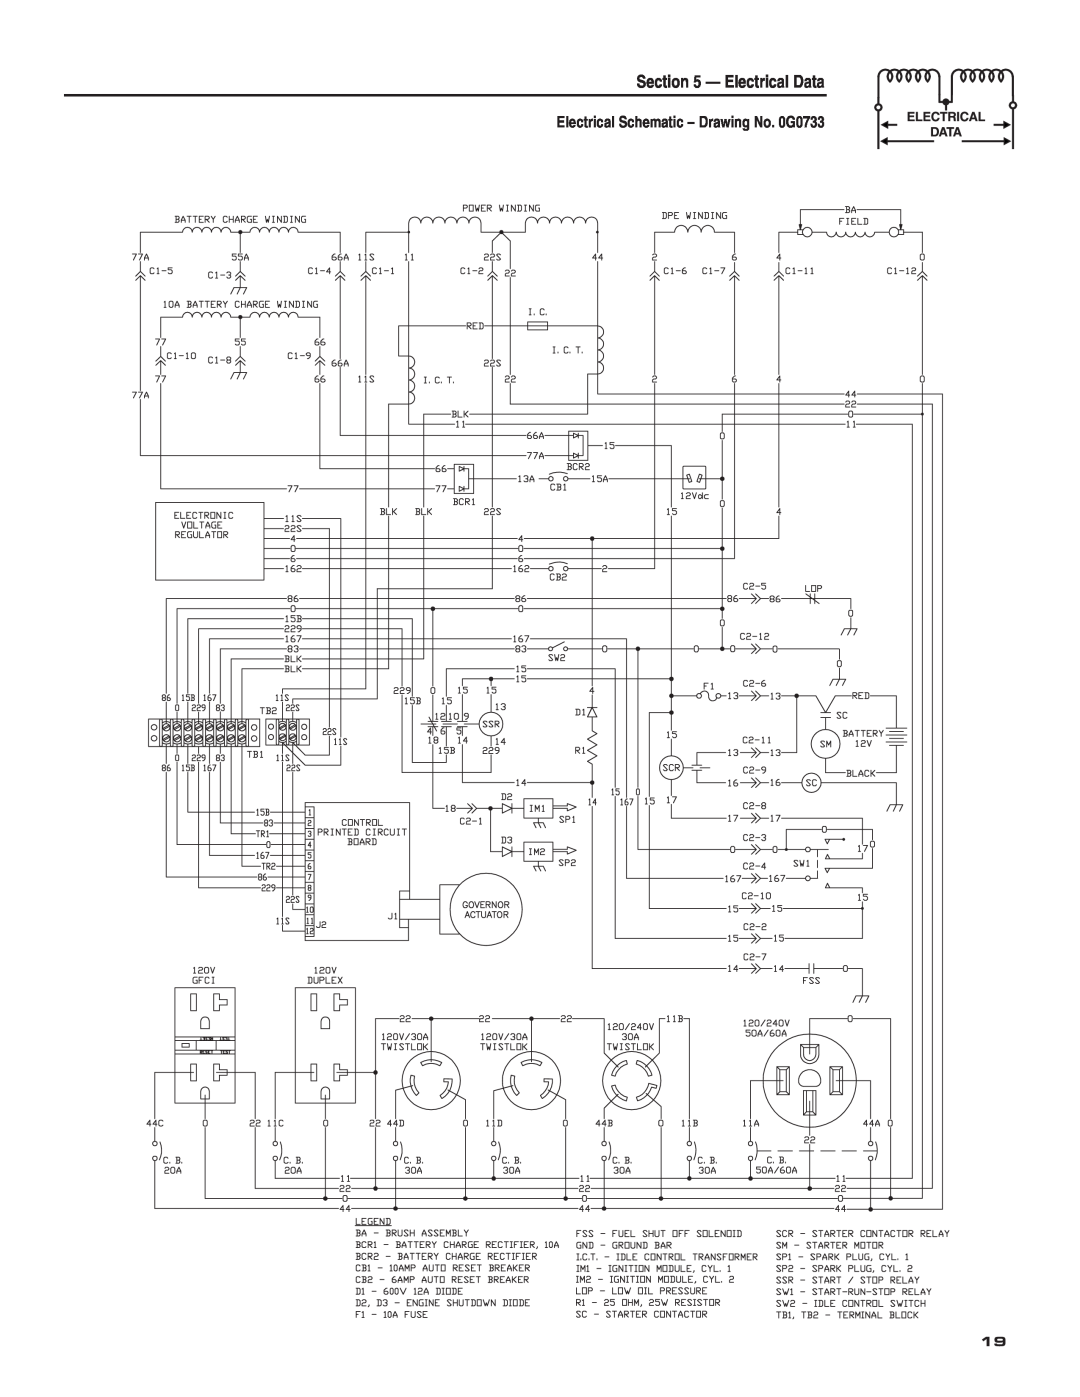 Guardian Technologies 004582-2 owner manual Electrical Data, Electrical Schematic – Drawing No. 0G0733 